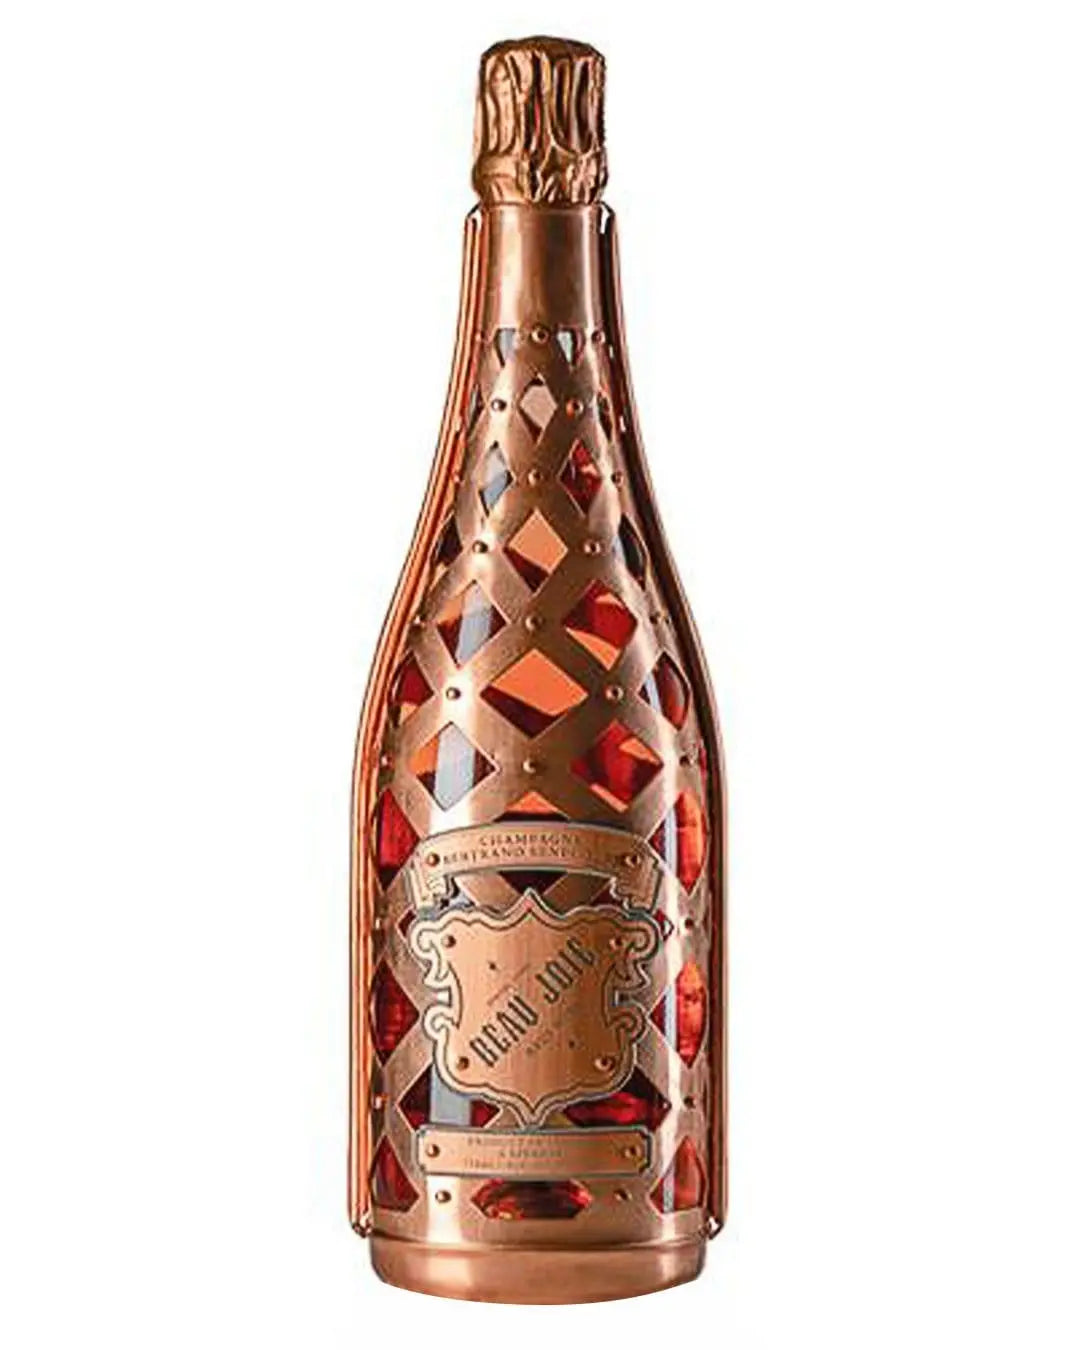 Beau Joie Rose Champagne NV, 75 cl Champagne & Sparkling